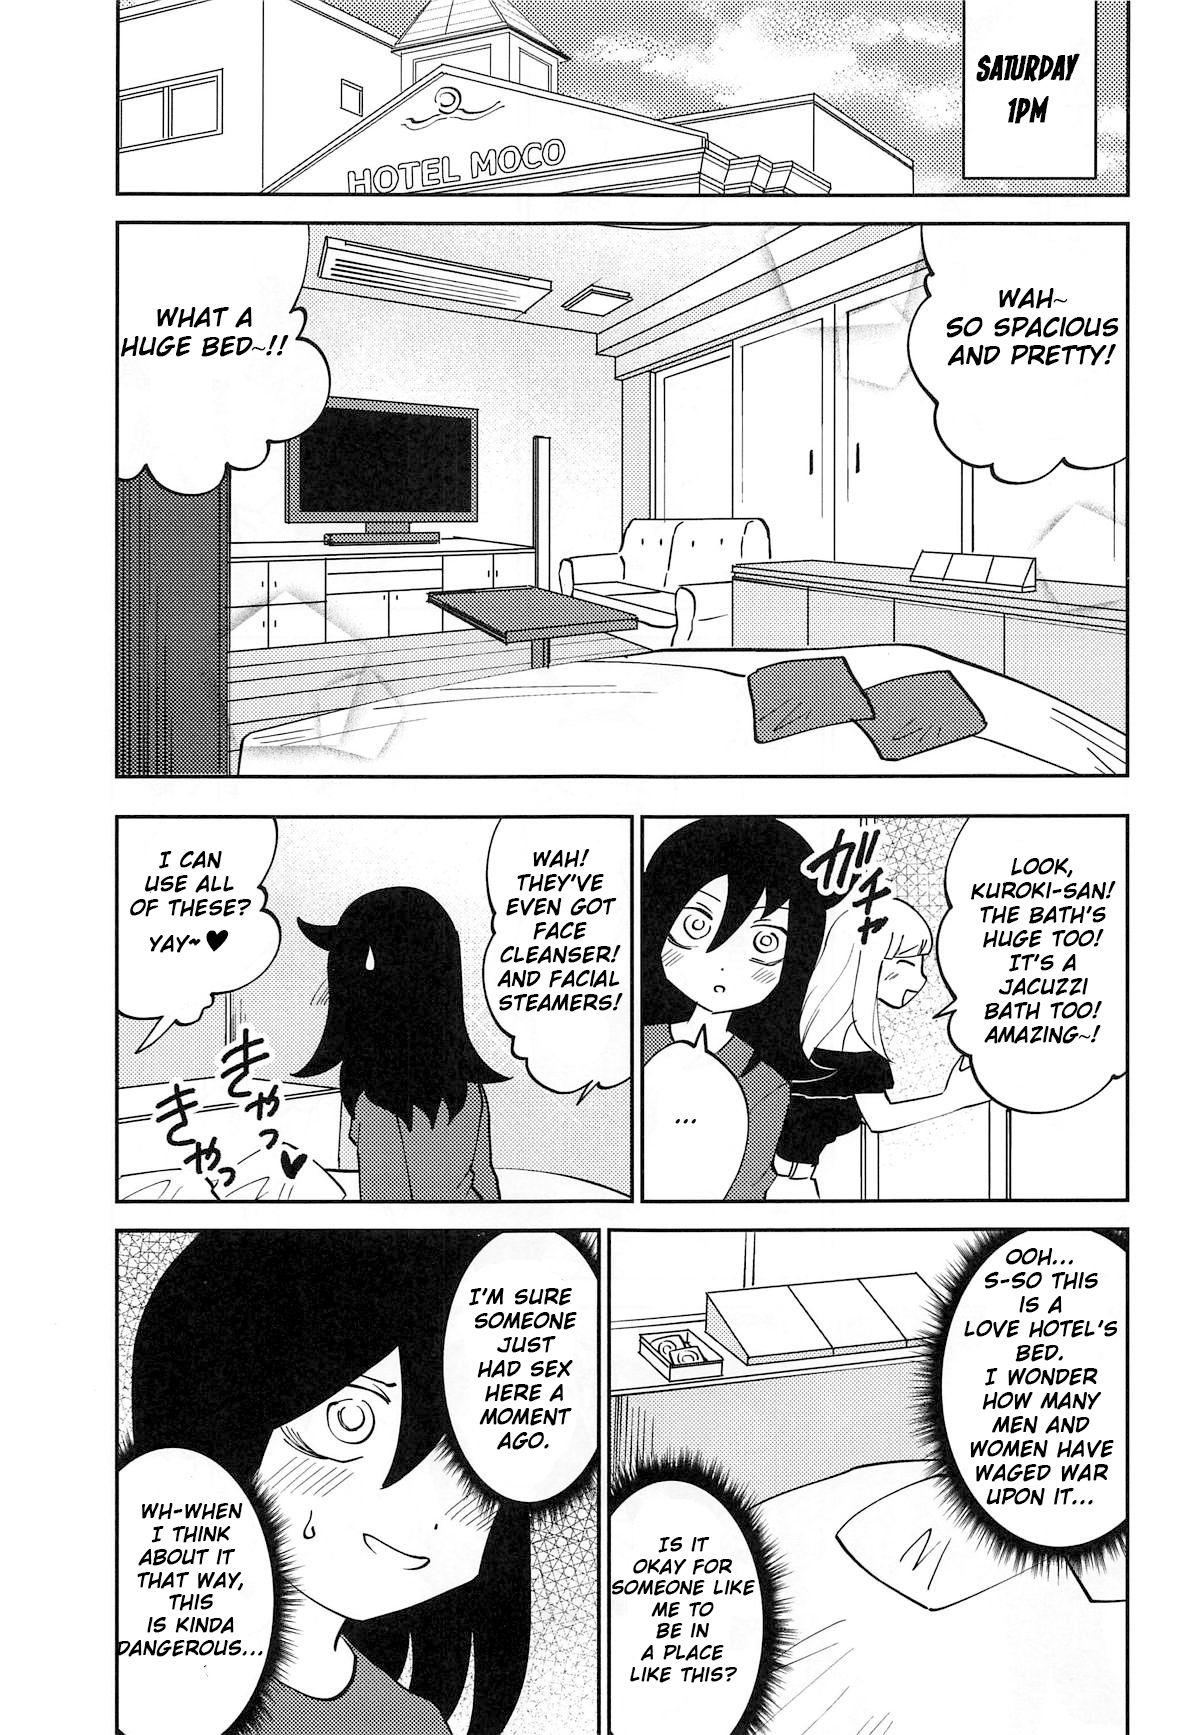 Argenta Kuroki-san, Anone. - Its not my fault that im not popular Naked - Page 6